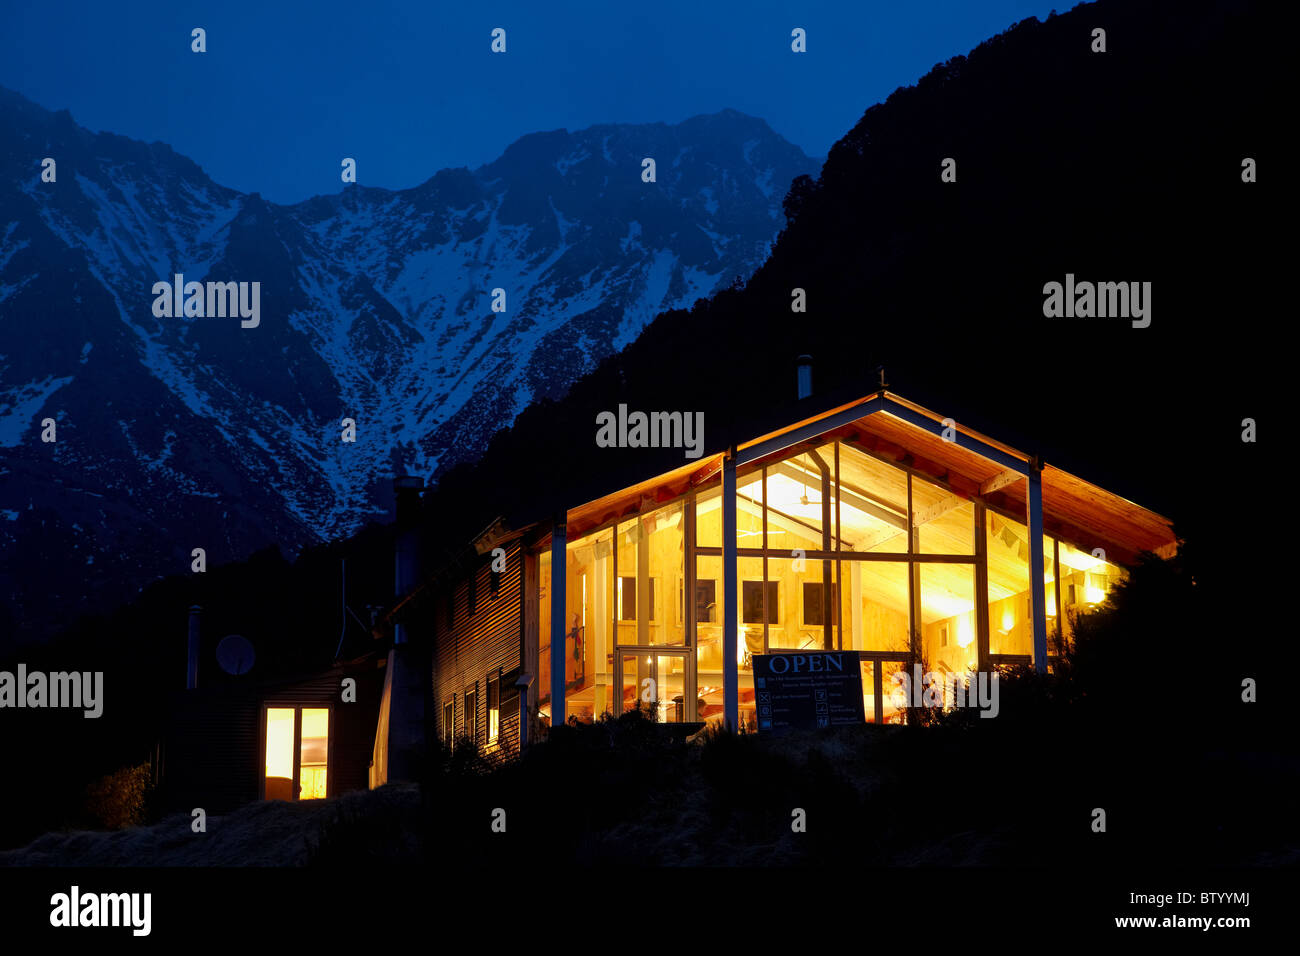 The Old Mountaineers Cafe, Bar & Restaurant at dusk, Mt Cook, Canterbury, South Island, New Zealand Stock Photo